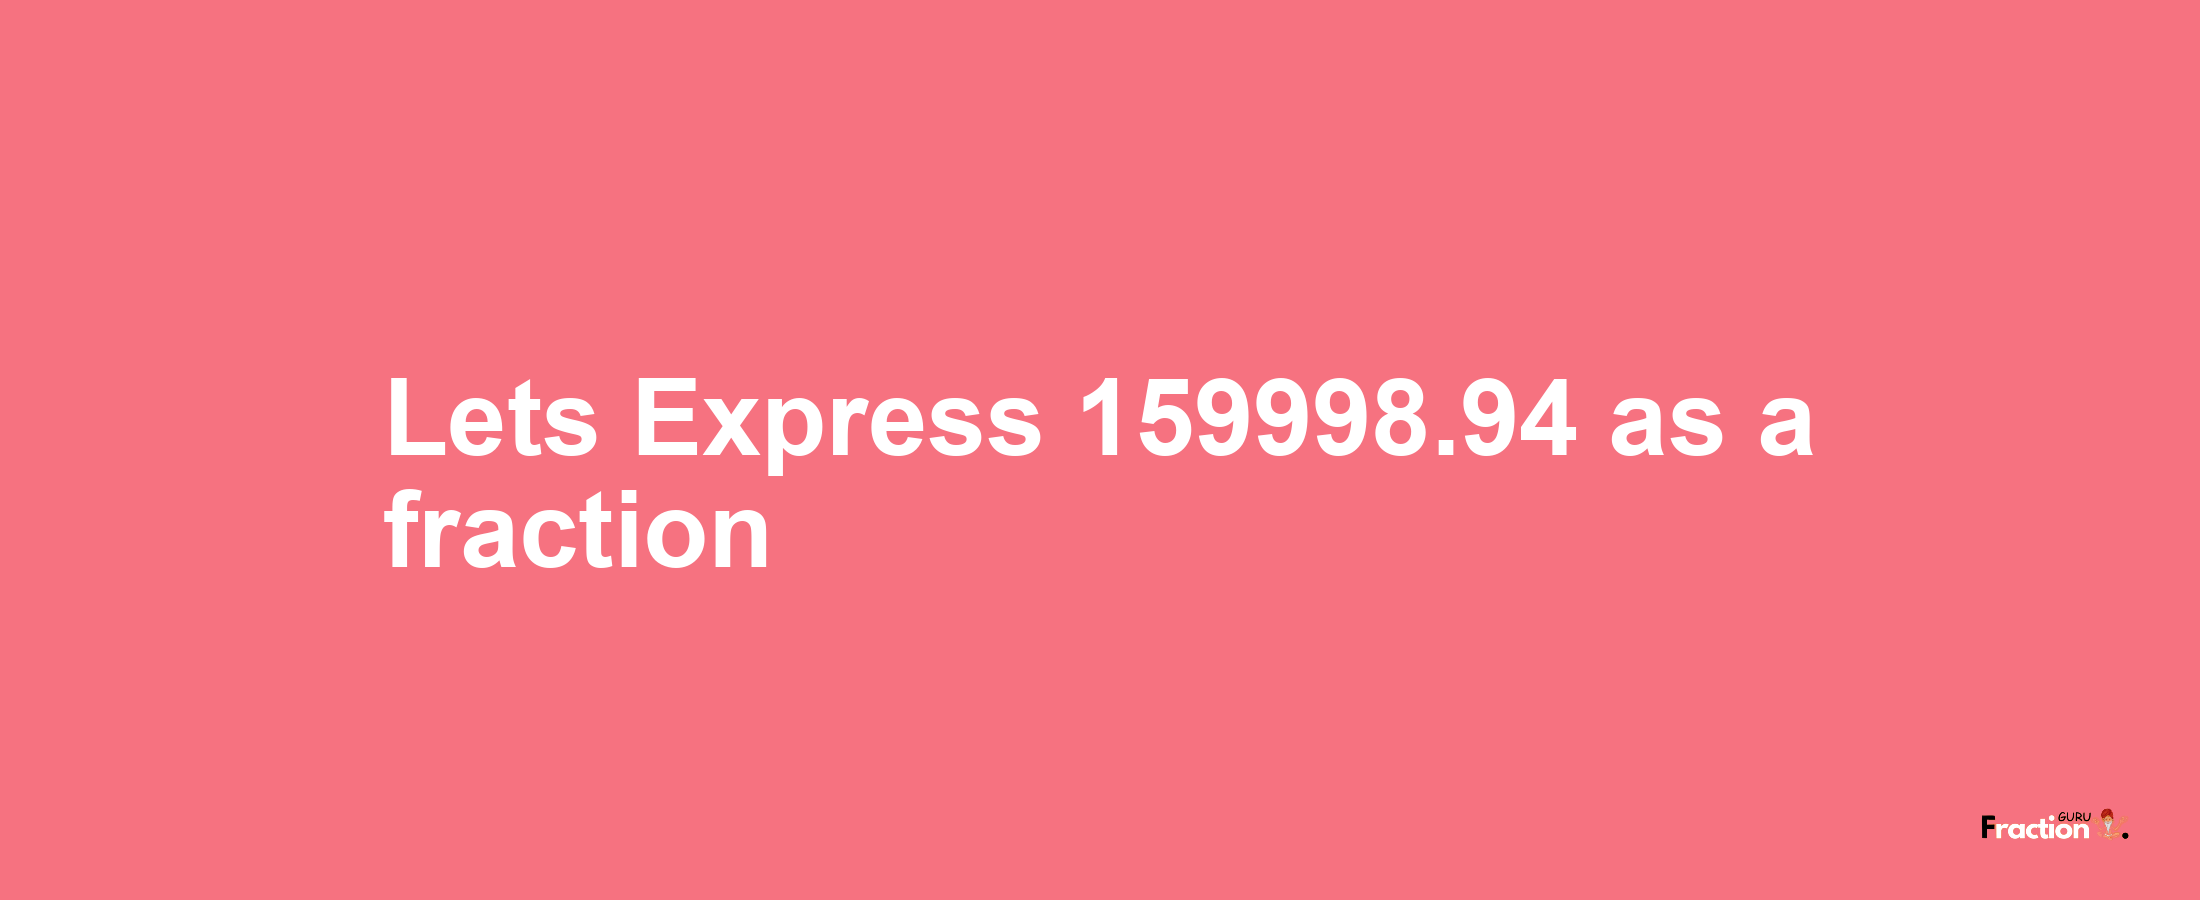 Lets Express 159998.94 as afraction